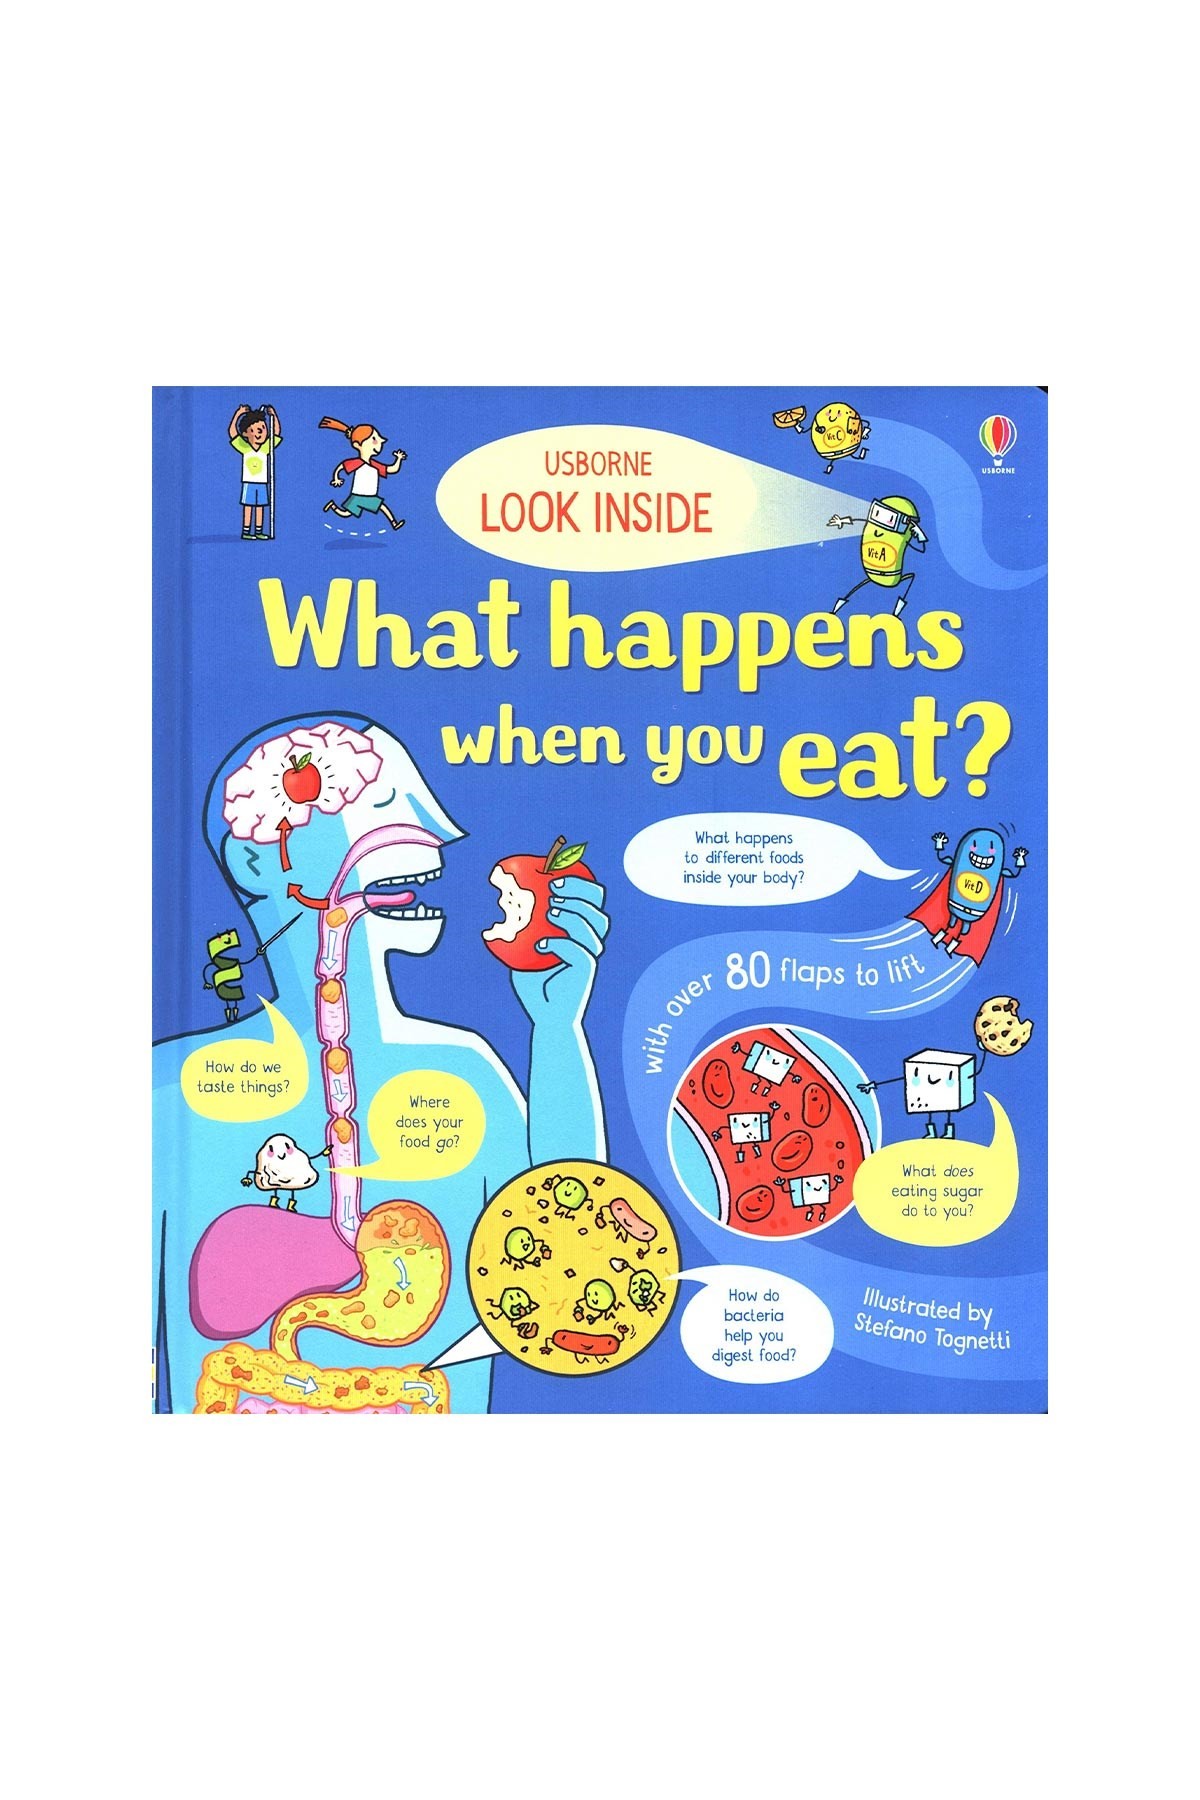 The Usborne Look Inside What Happens When You Eat